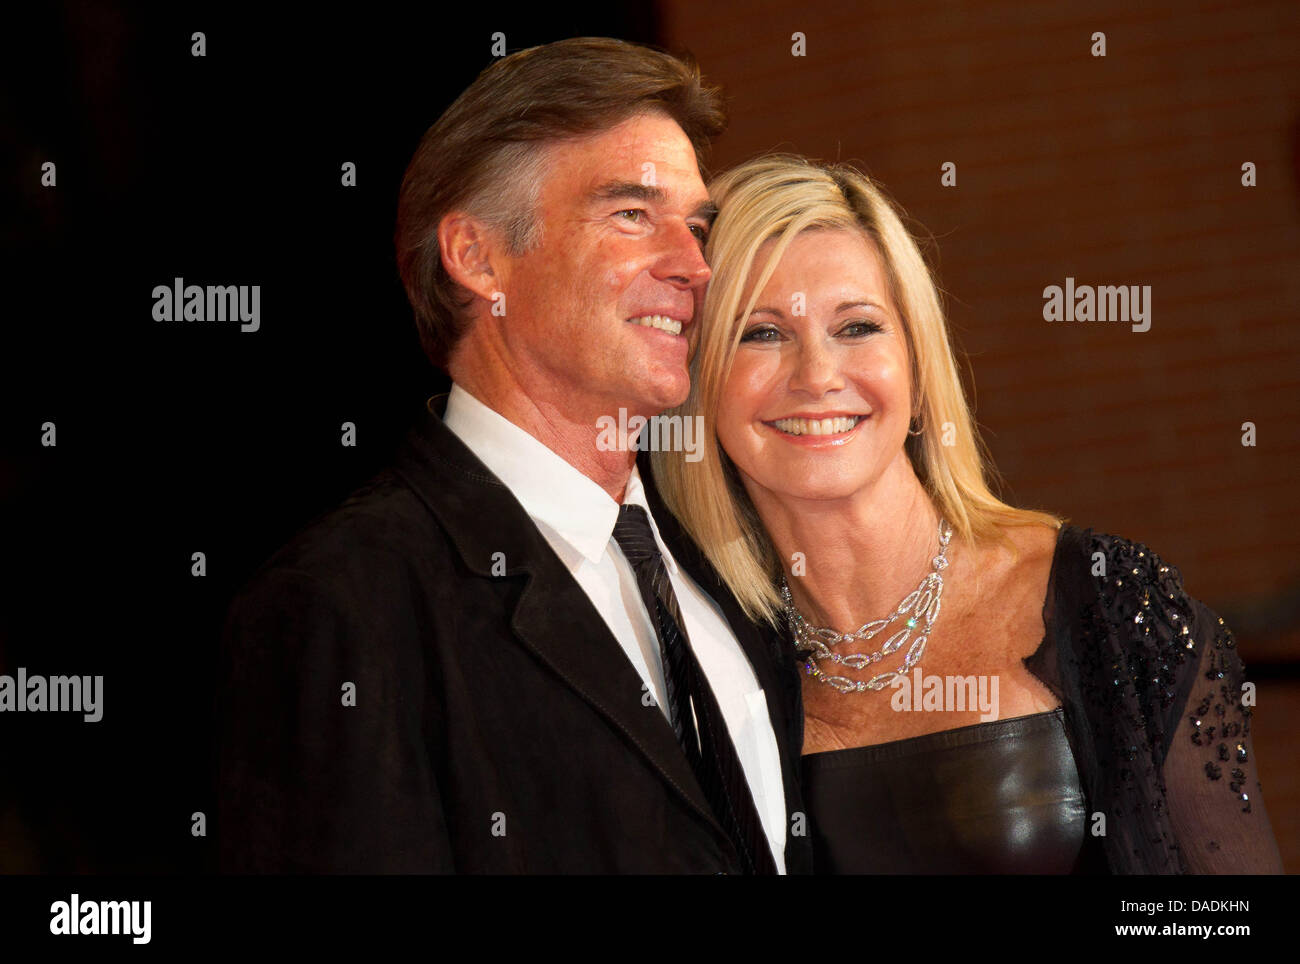 British-Australian actress Olivia Newton-John (R) and her husband Amazon John Easterling attend the premiere of her new film 'A Few Best Men' during the 6th International Rome Film Festival at Auditorium Parco Della Musica in Rome, Italy, on 28 October 2011. Photo: Hubert Boesl Stock Photo